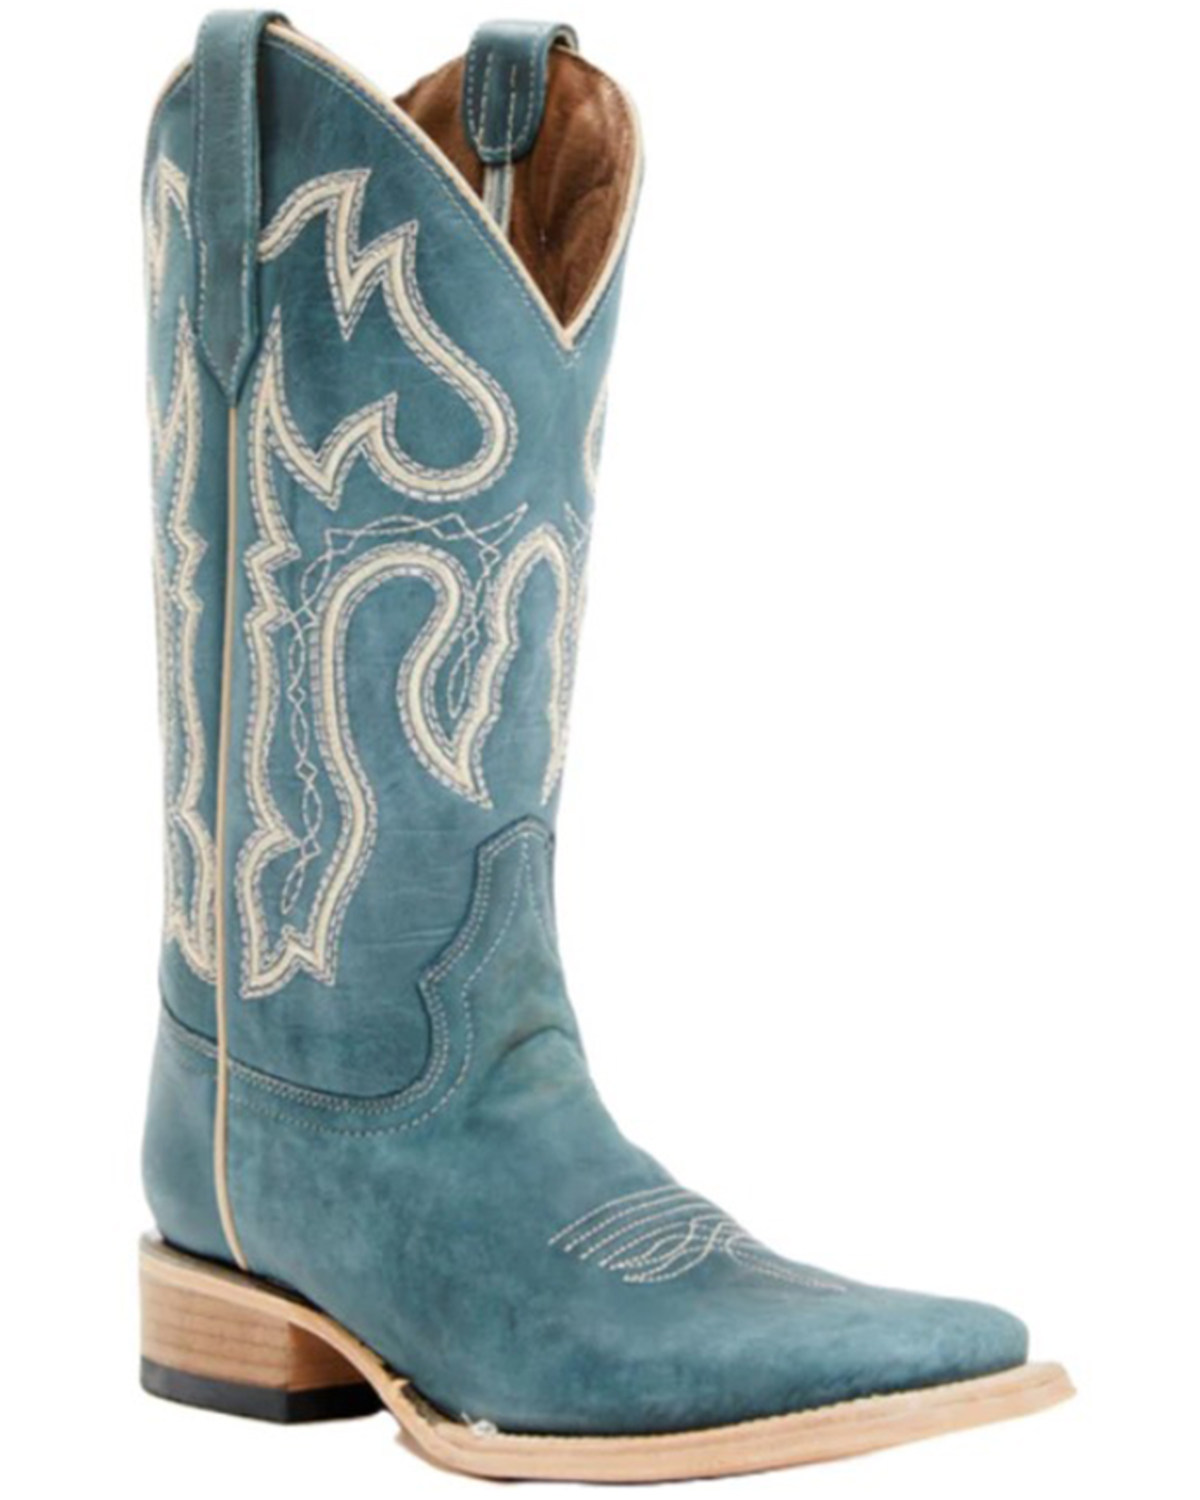 Corral Women's Distressed Embroidered Western Boots - Broad Square Toe